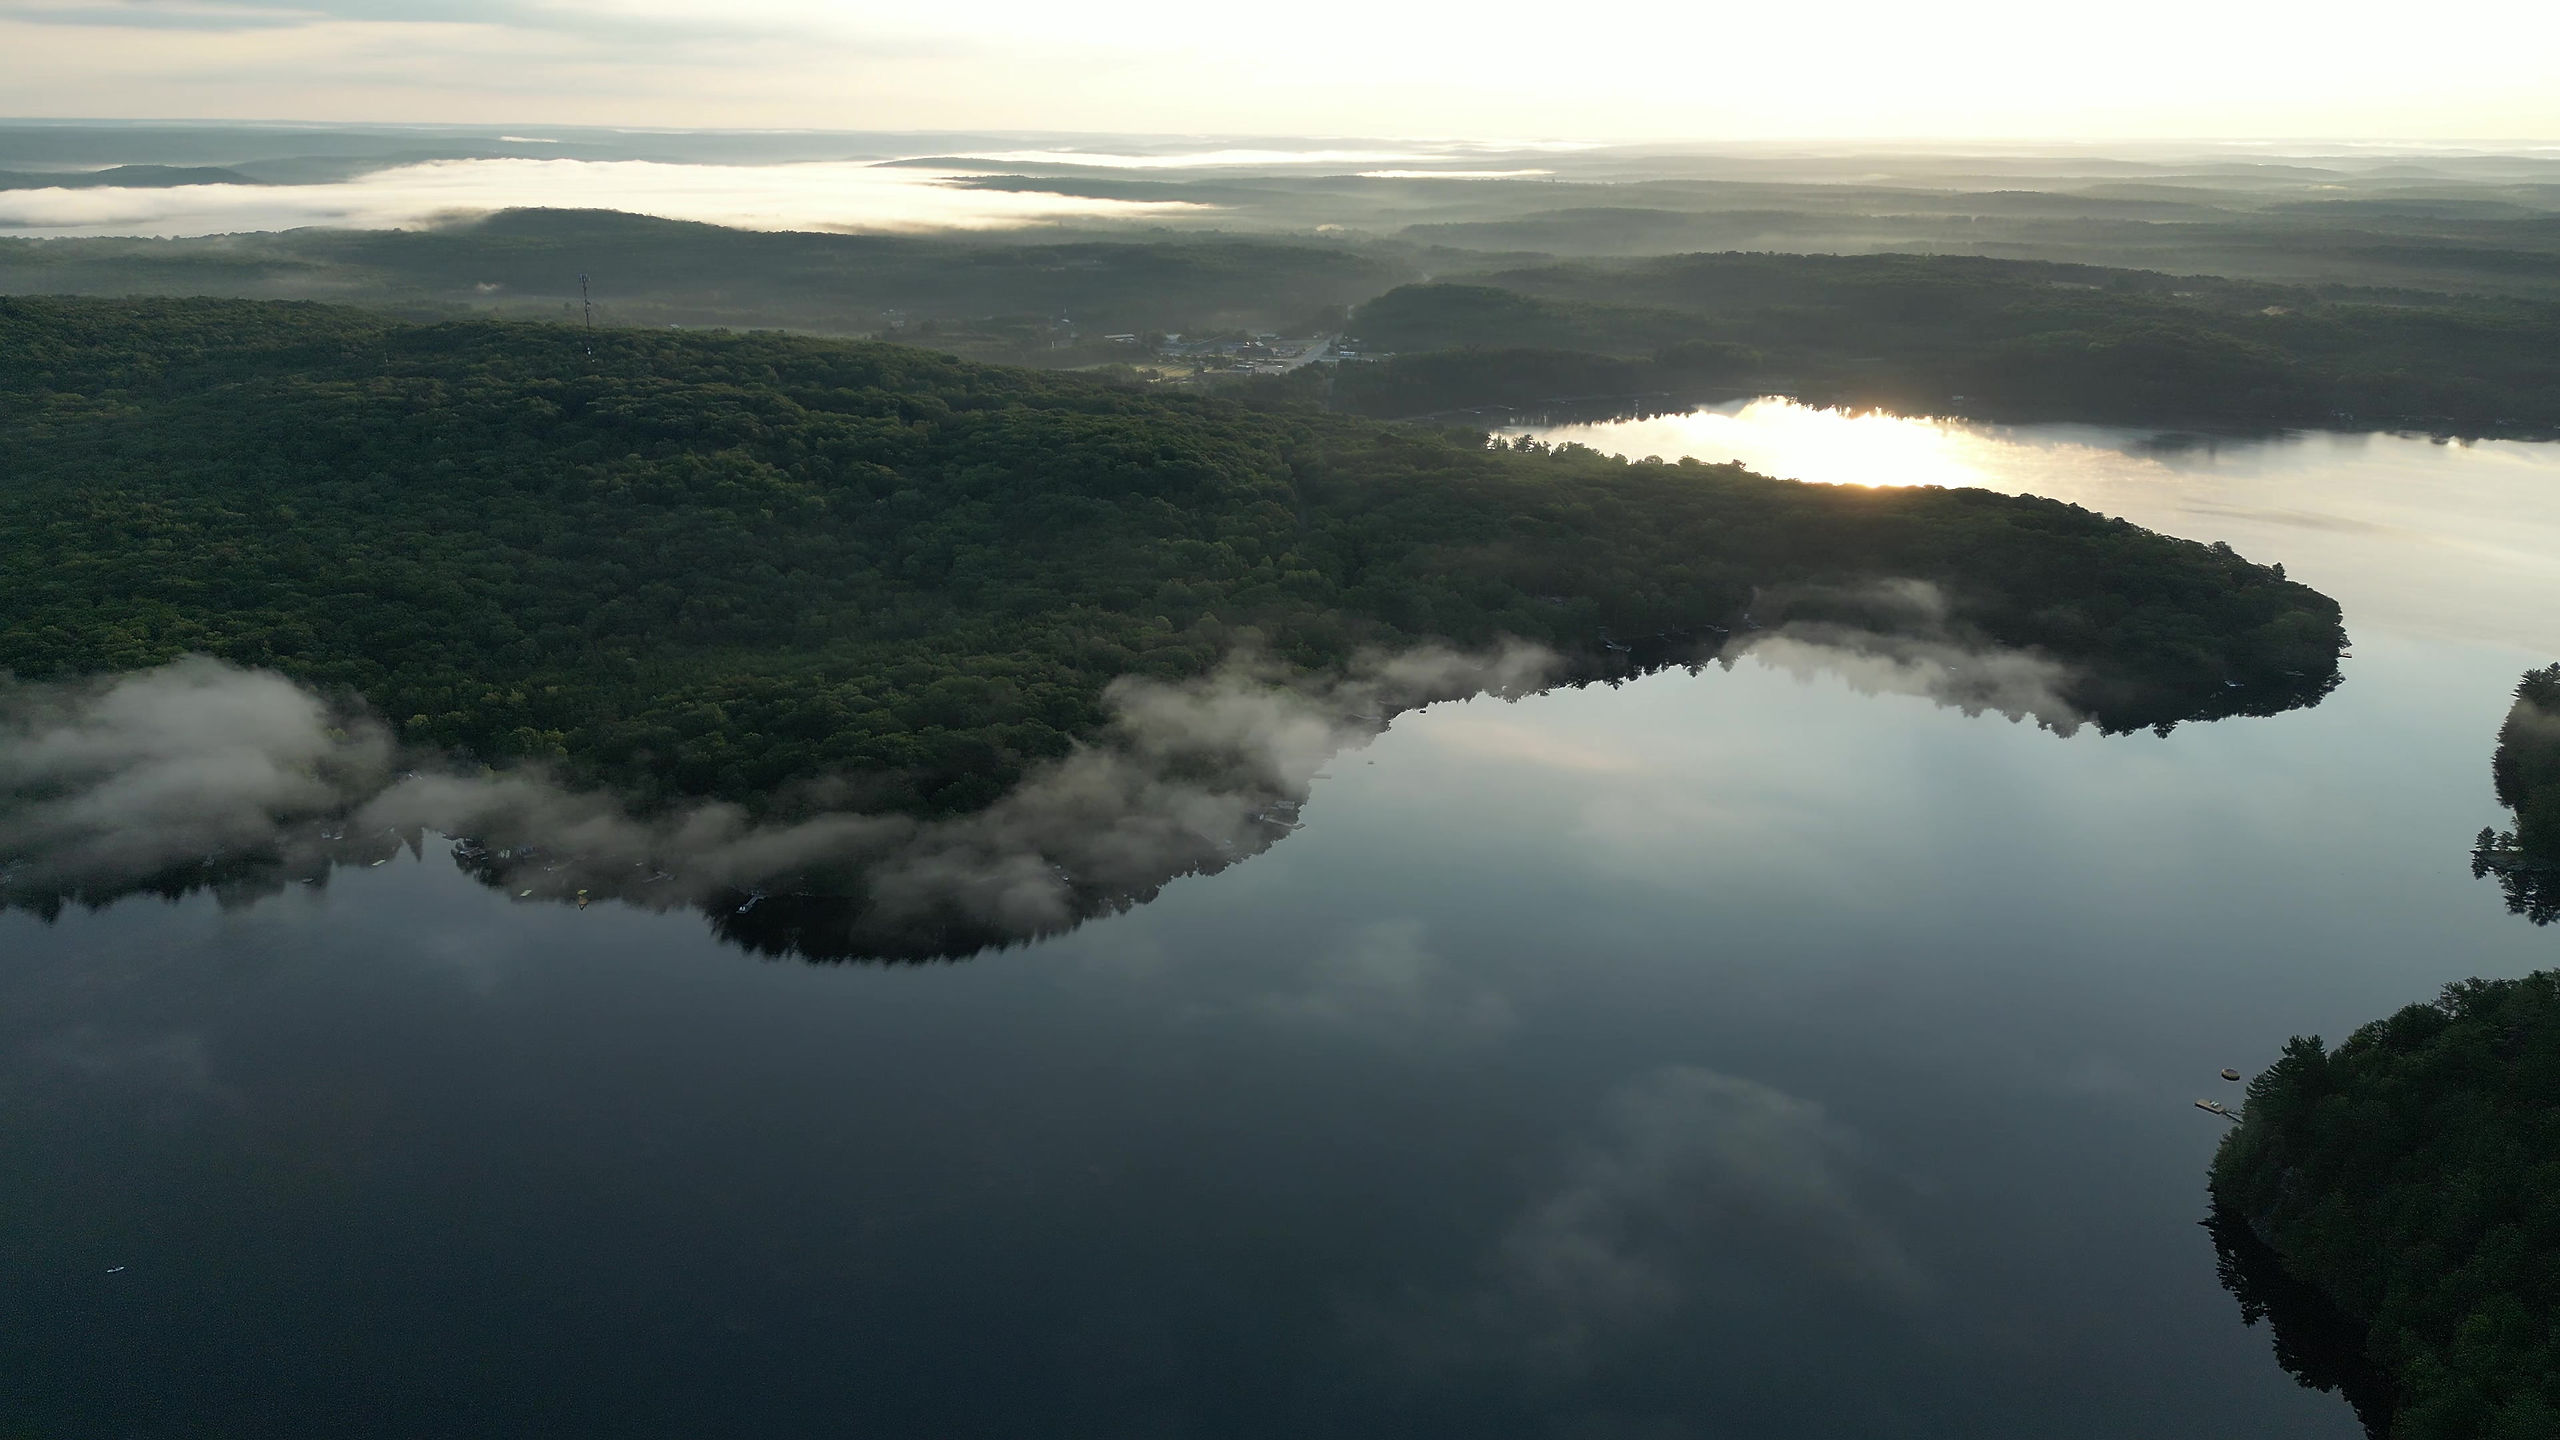 View the Three-Lake Chain from the Clouds